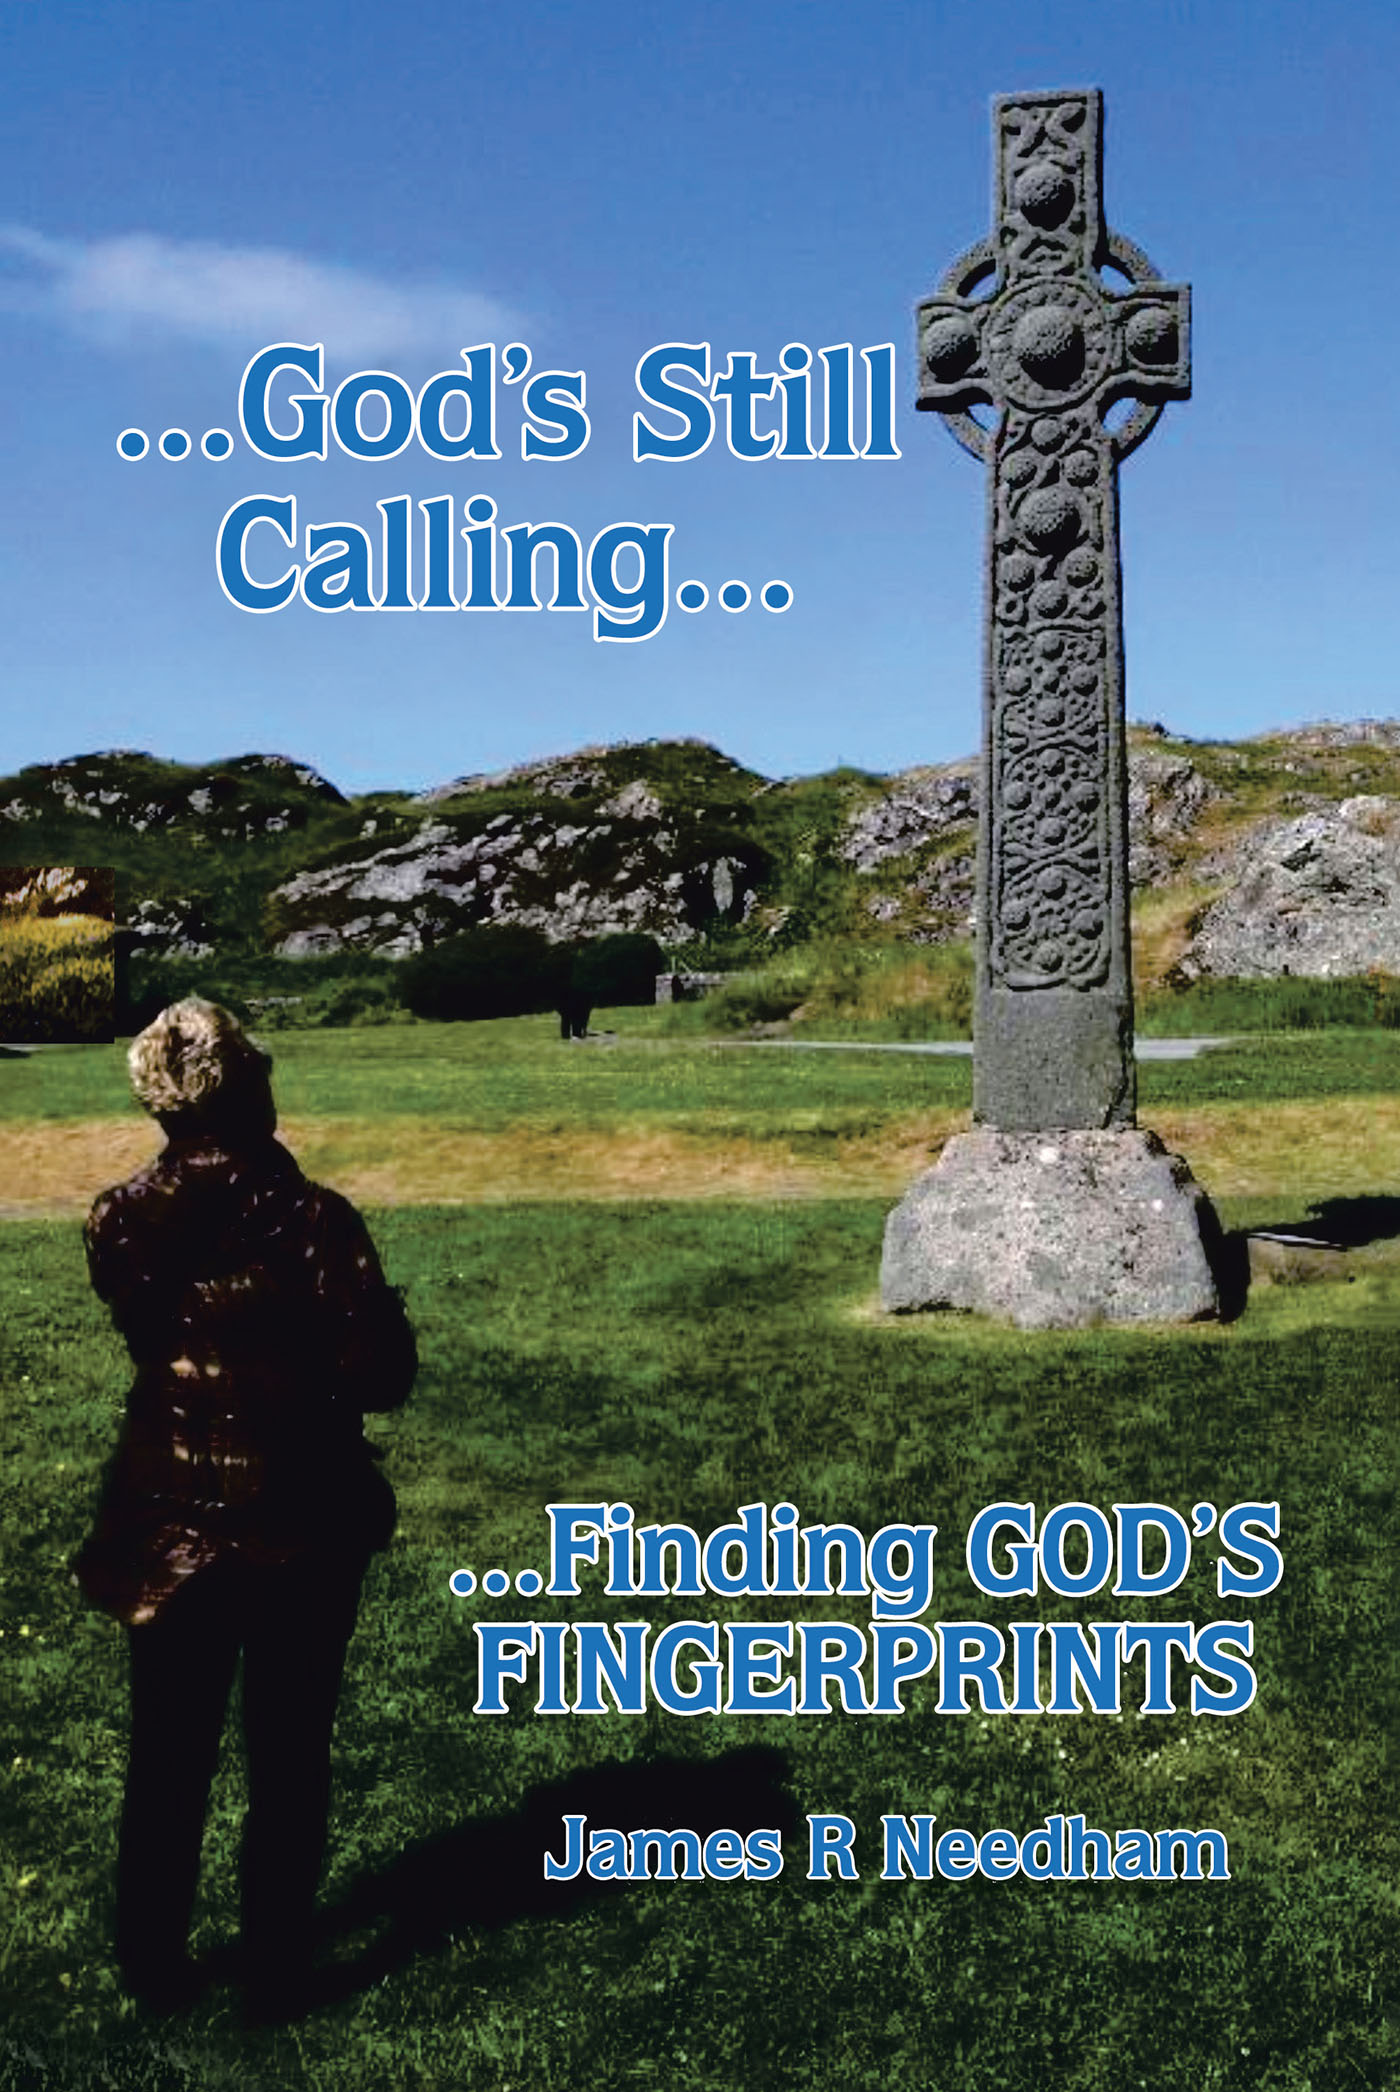 James R. Needham’s Newly Released “...God’s Still Calling...: ...Finding GOD’s FINGERPRINTS” is a Captivating Reflection on a Long and Varied Life